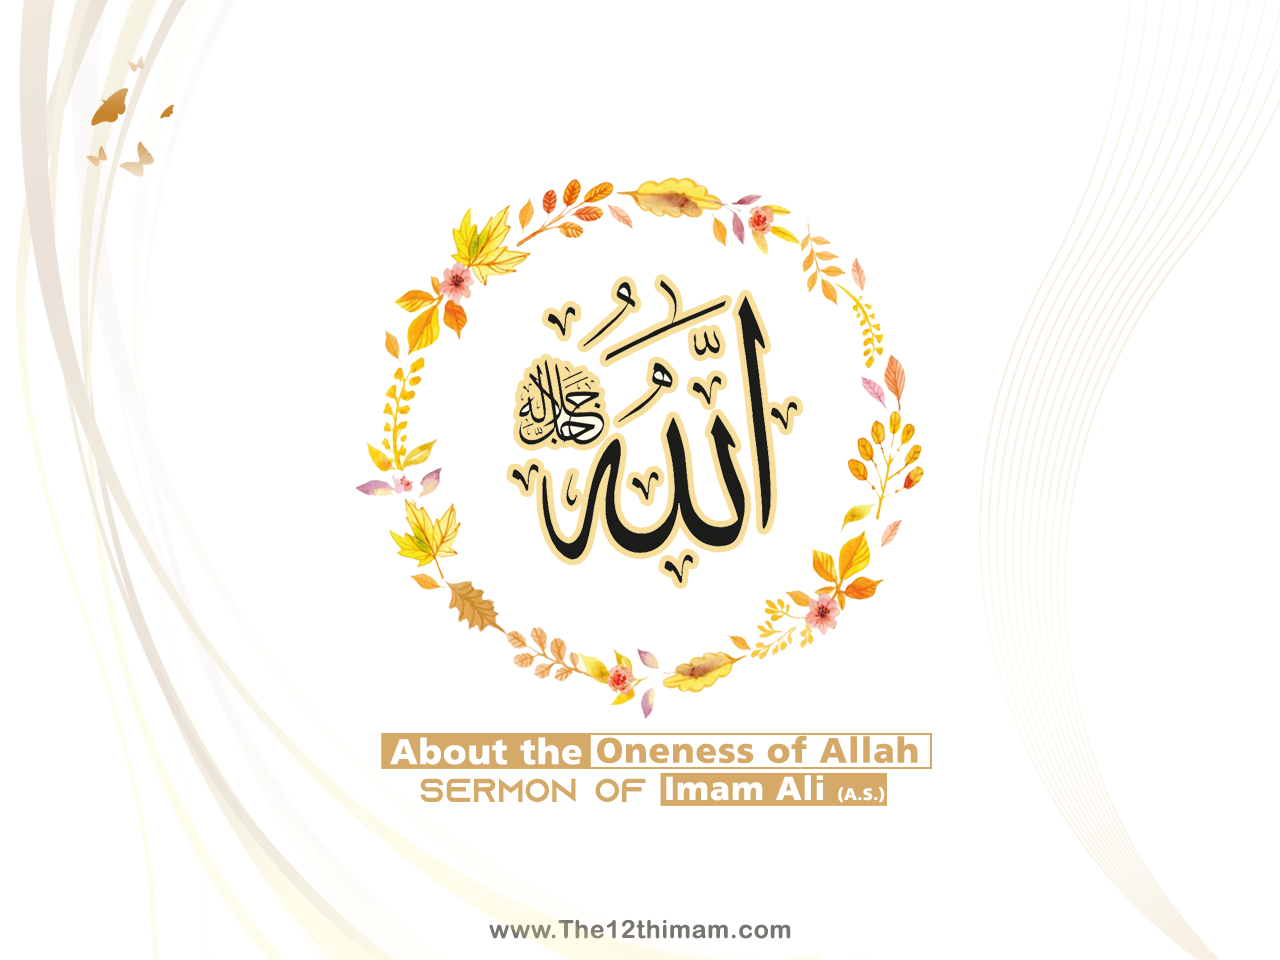 About the Oneness of Allah (God)